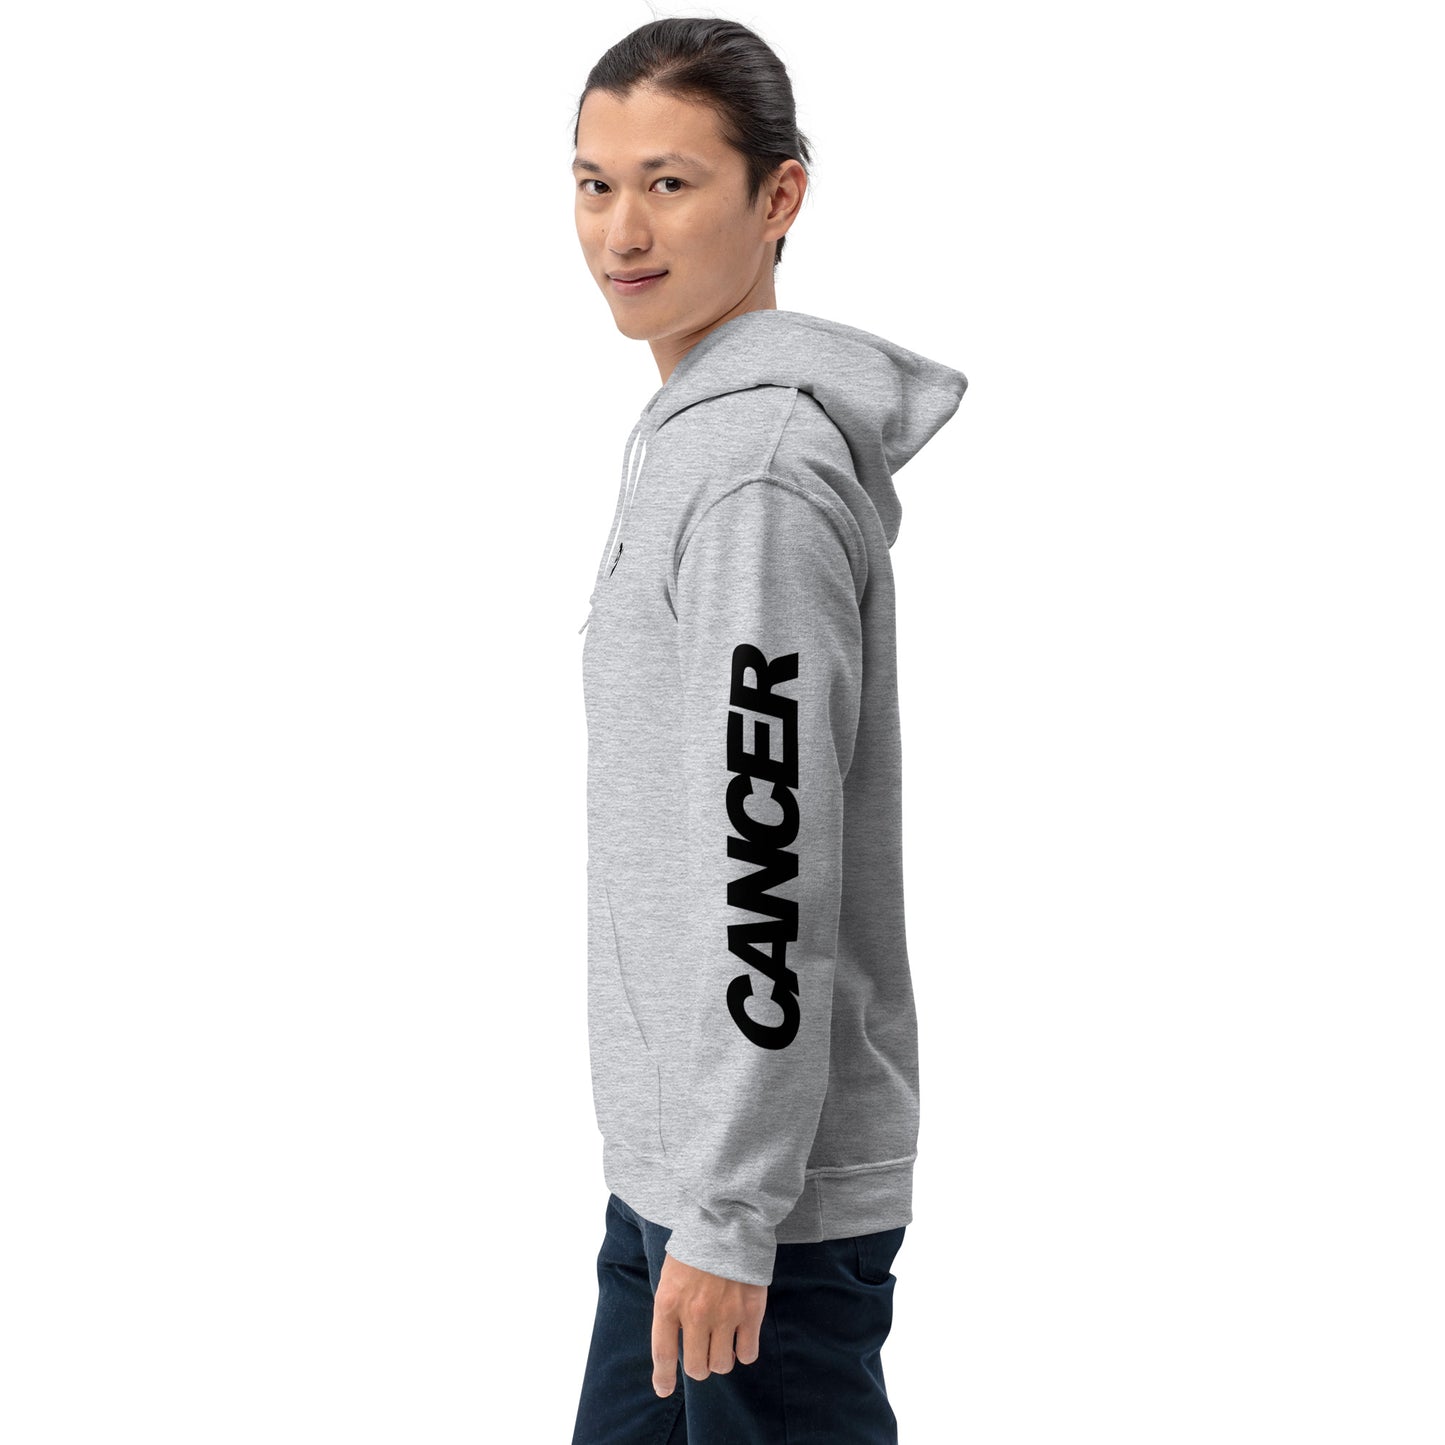 Cancer & Cancer - Unisex Couple Hoodie